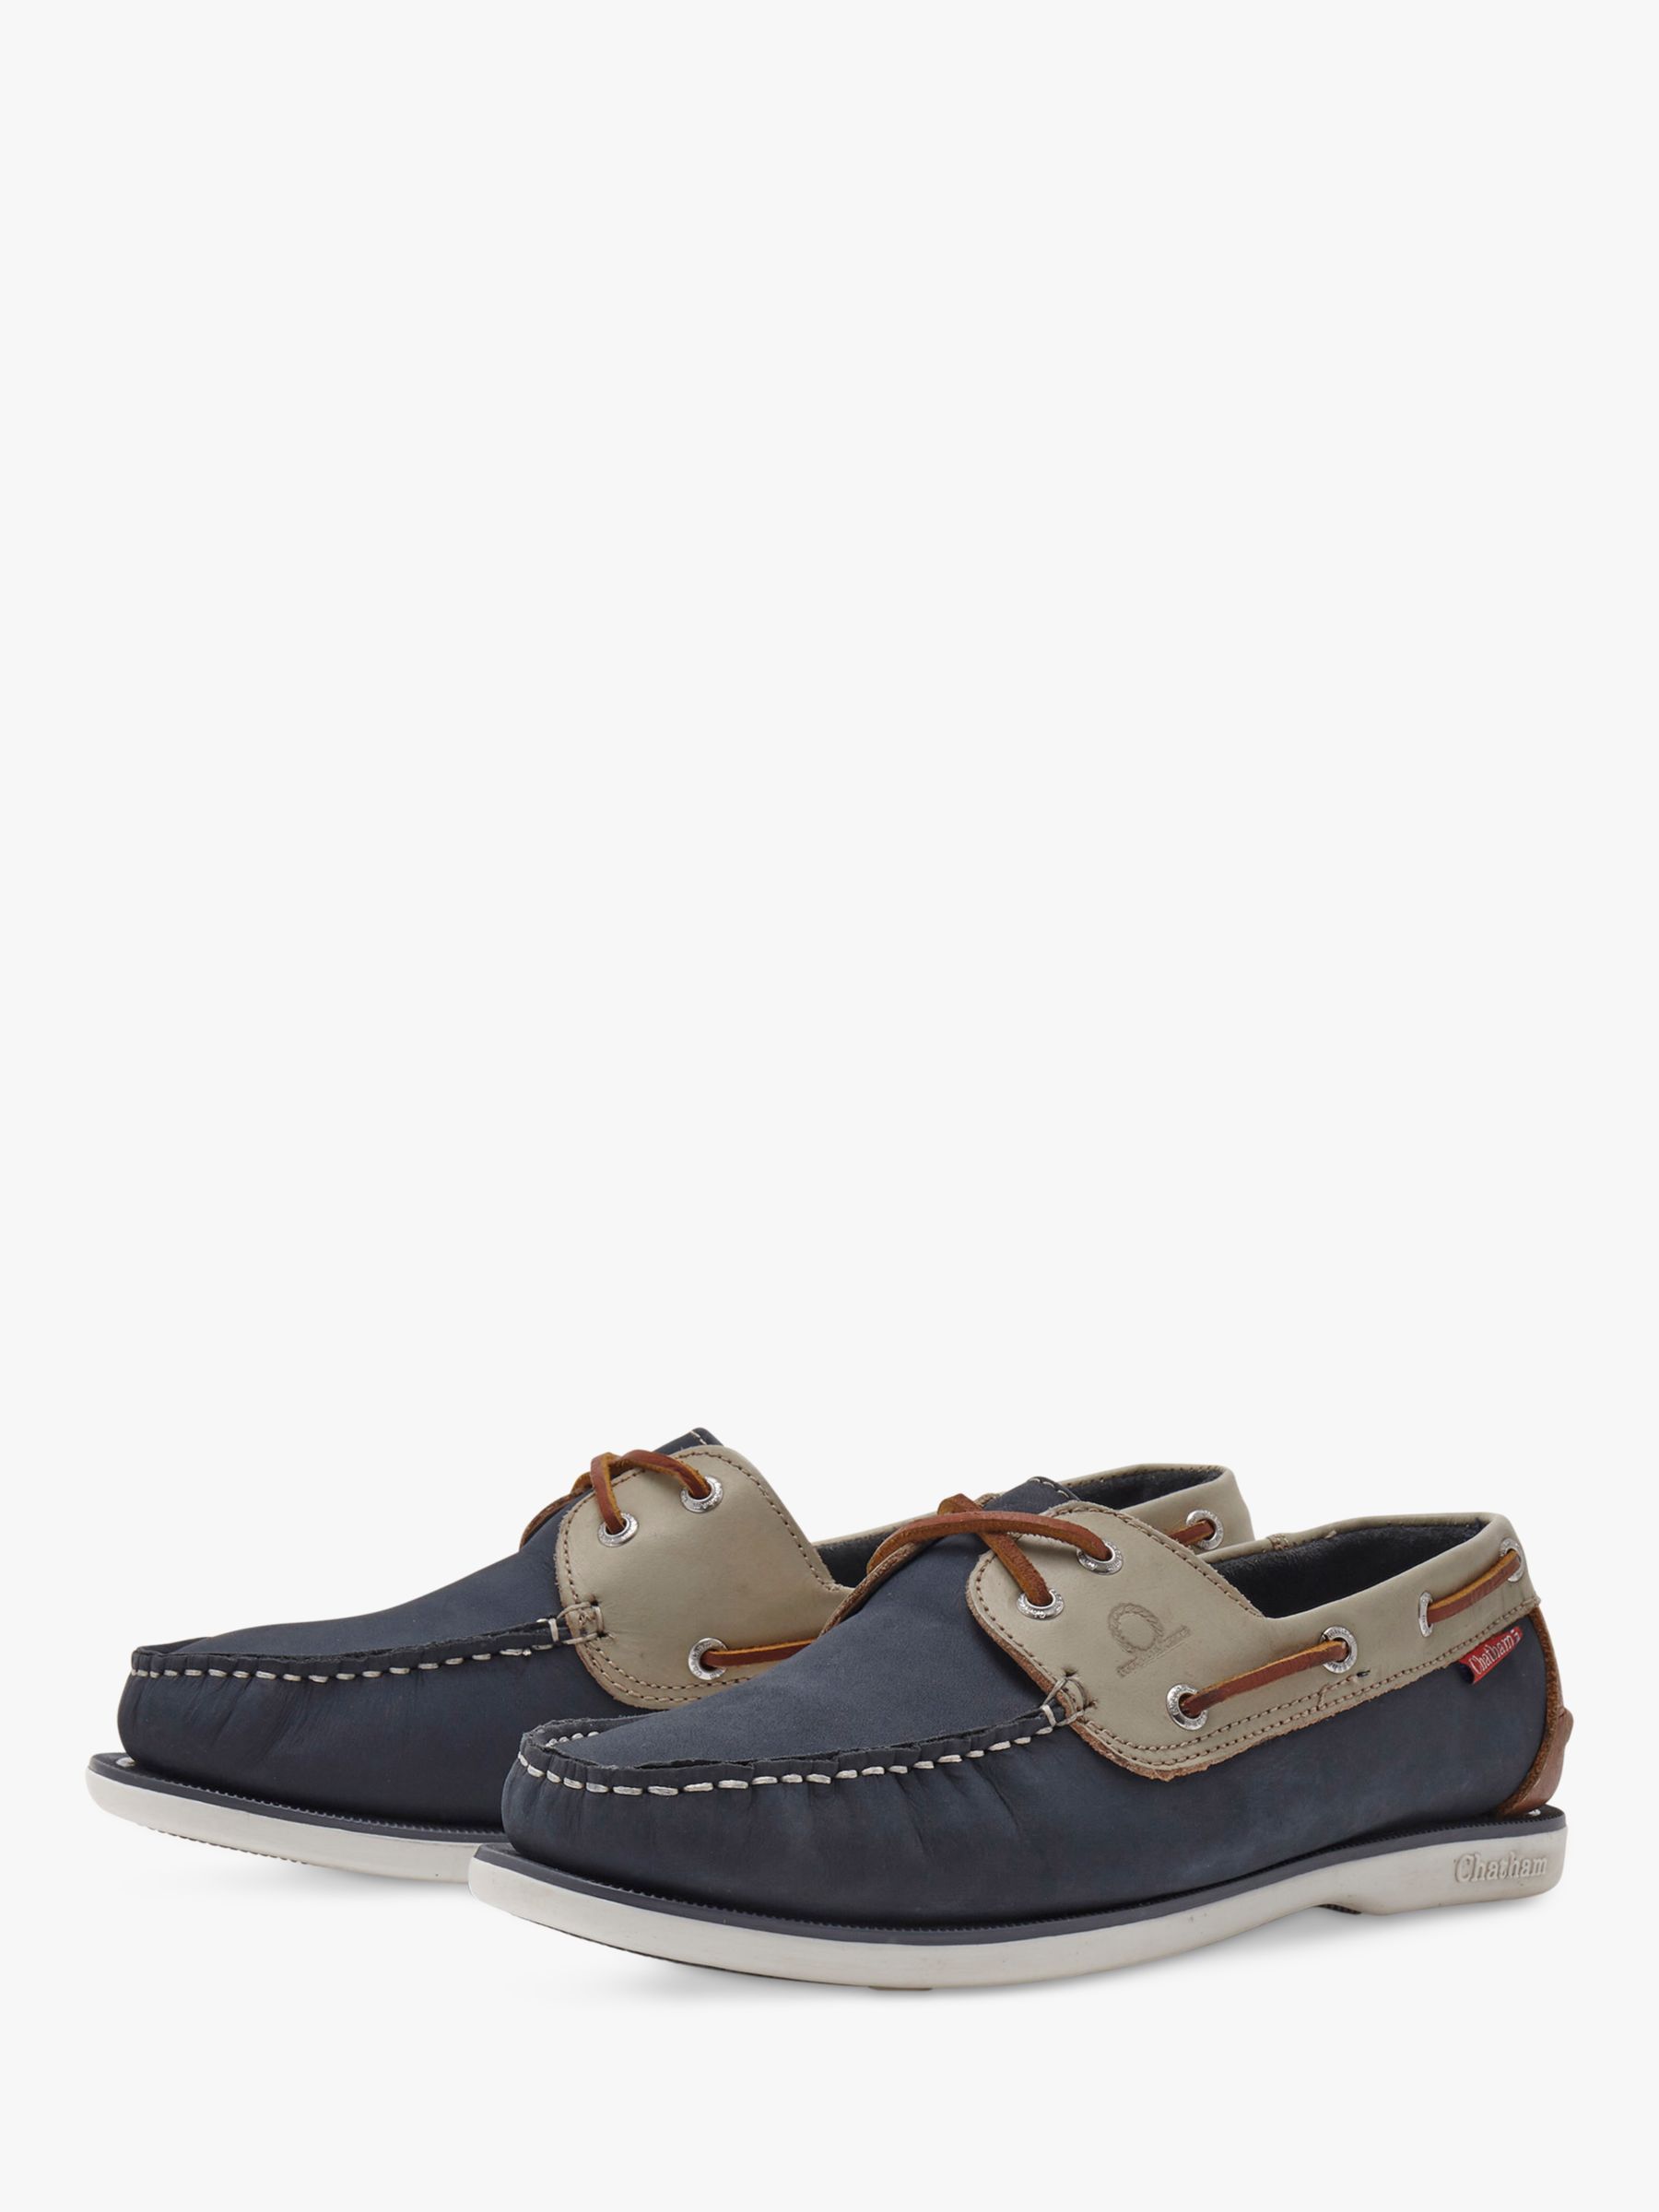 Chatham Whitstable Leather Boat Shoes, Multi at John Lewis & Partners